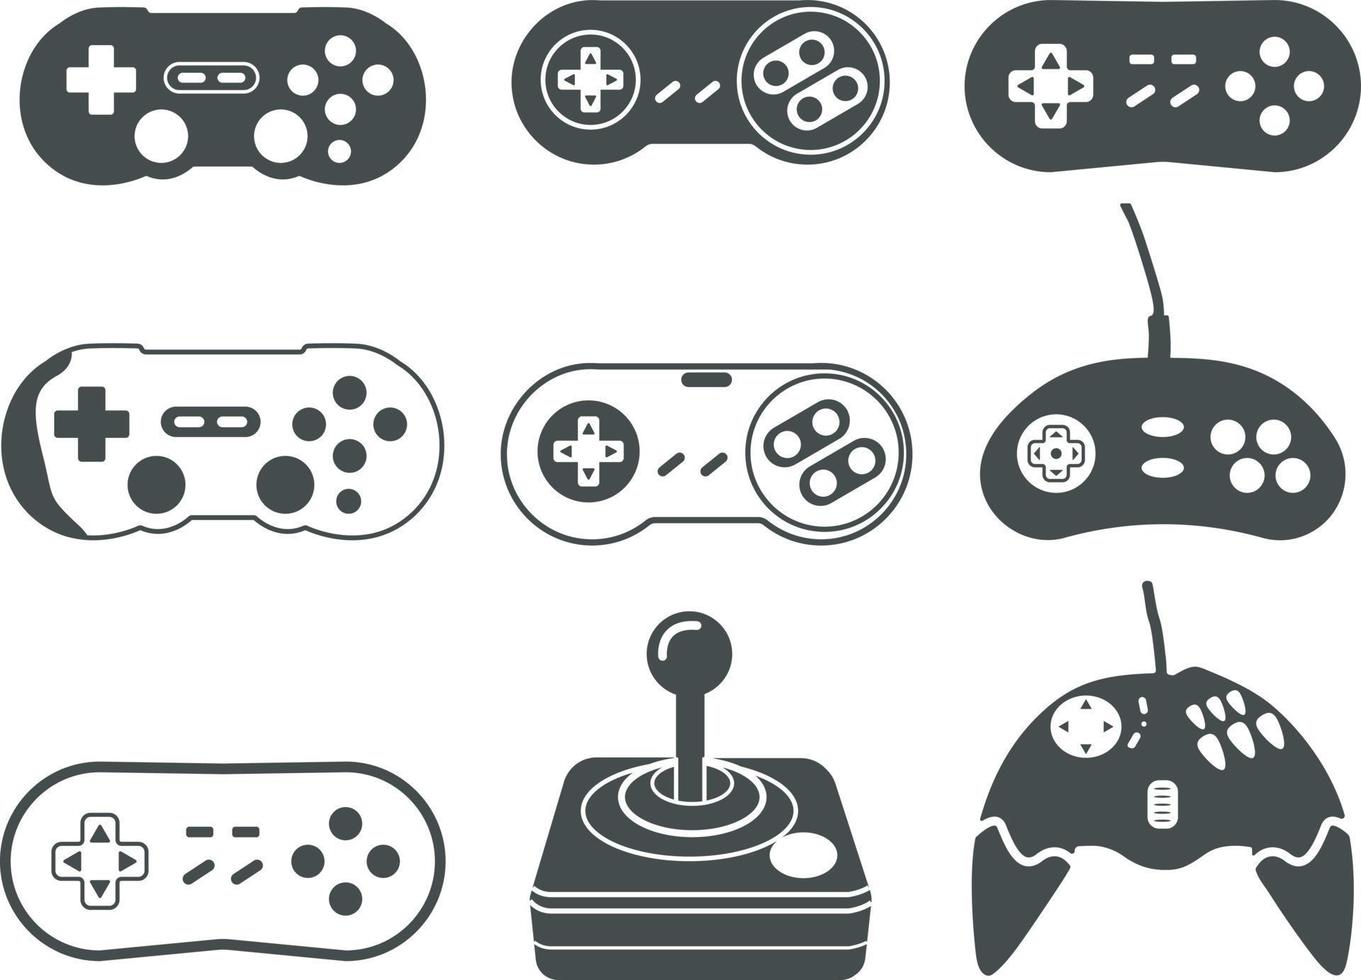 Game controller silhouette,Old Game Controller SVG, Video games joystick, playing device, Game console vector illustration.